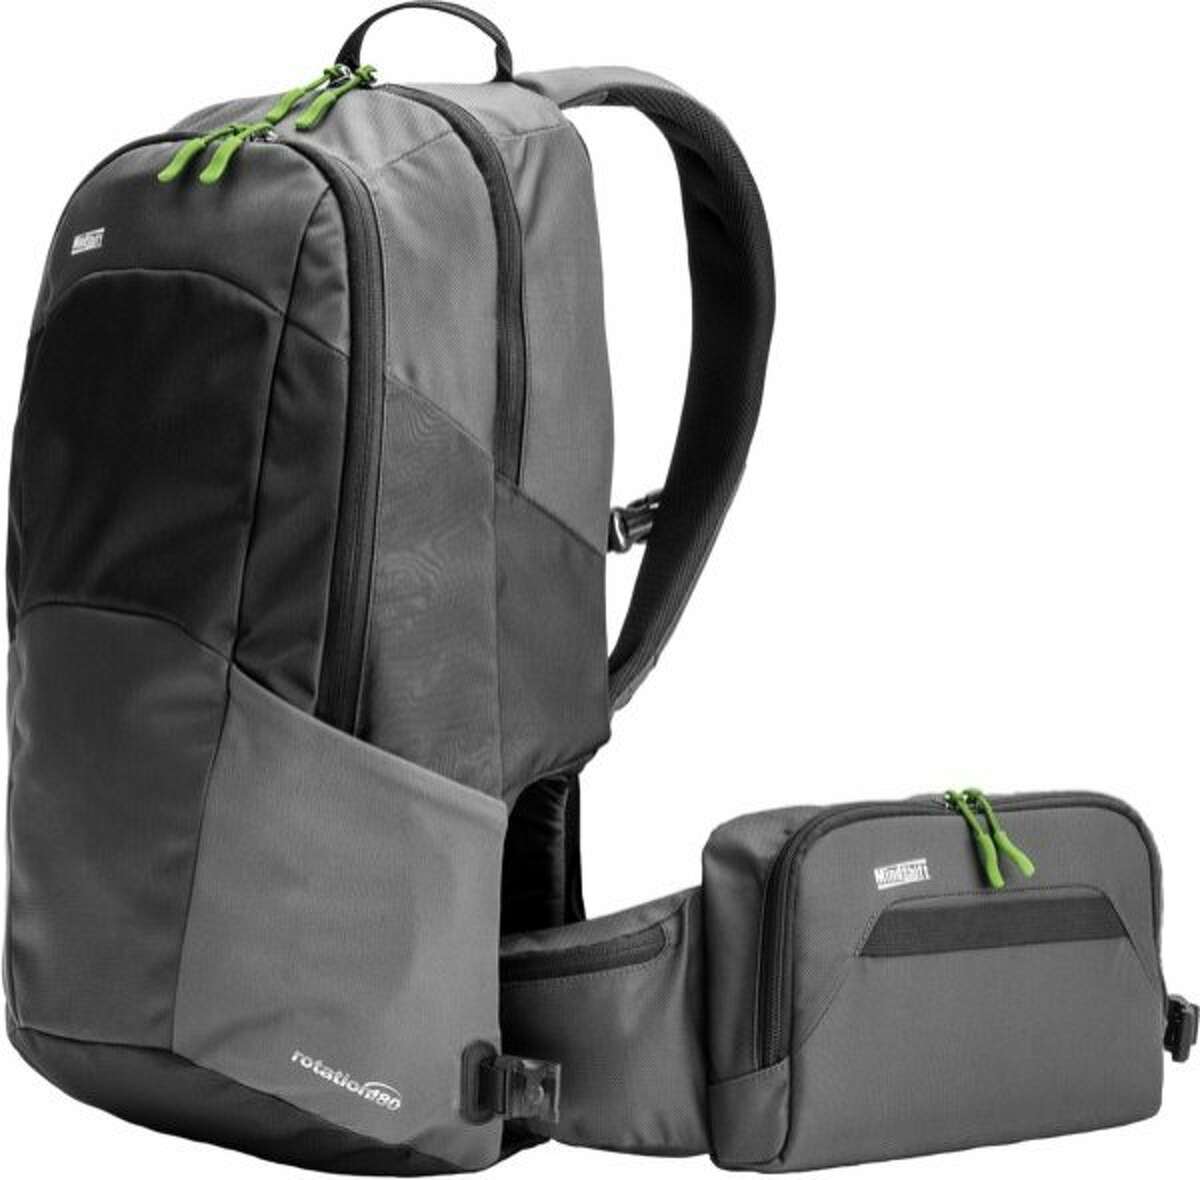 Rotation180 Travel Away 22L pack by Mindshift